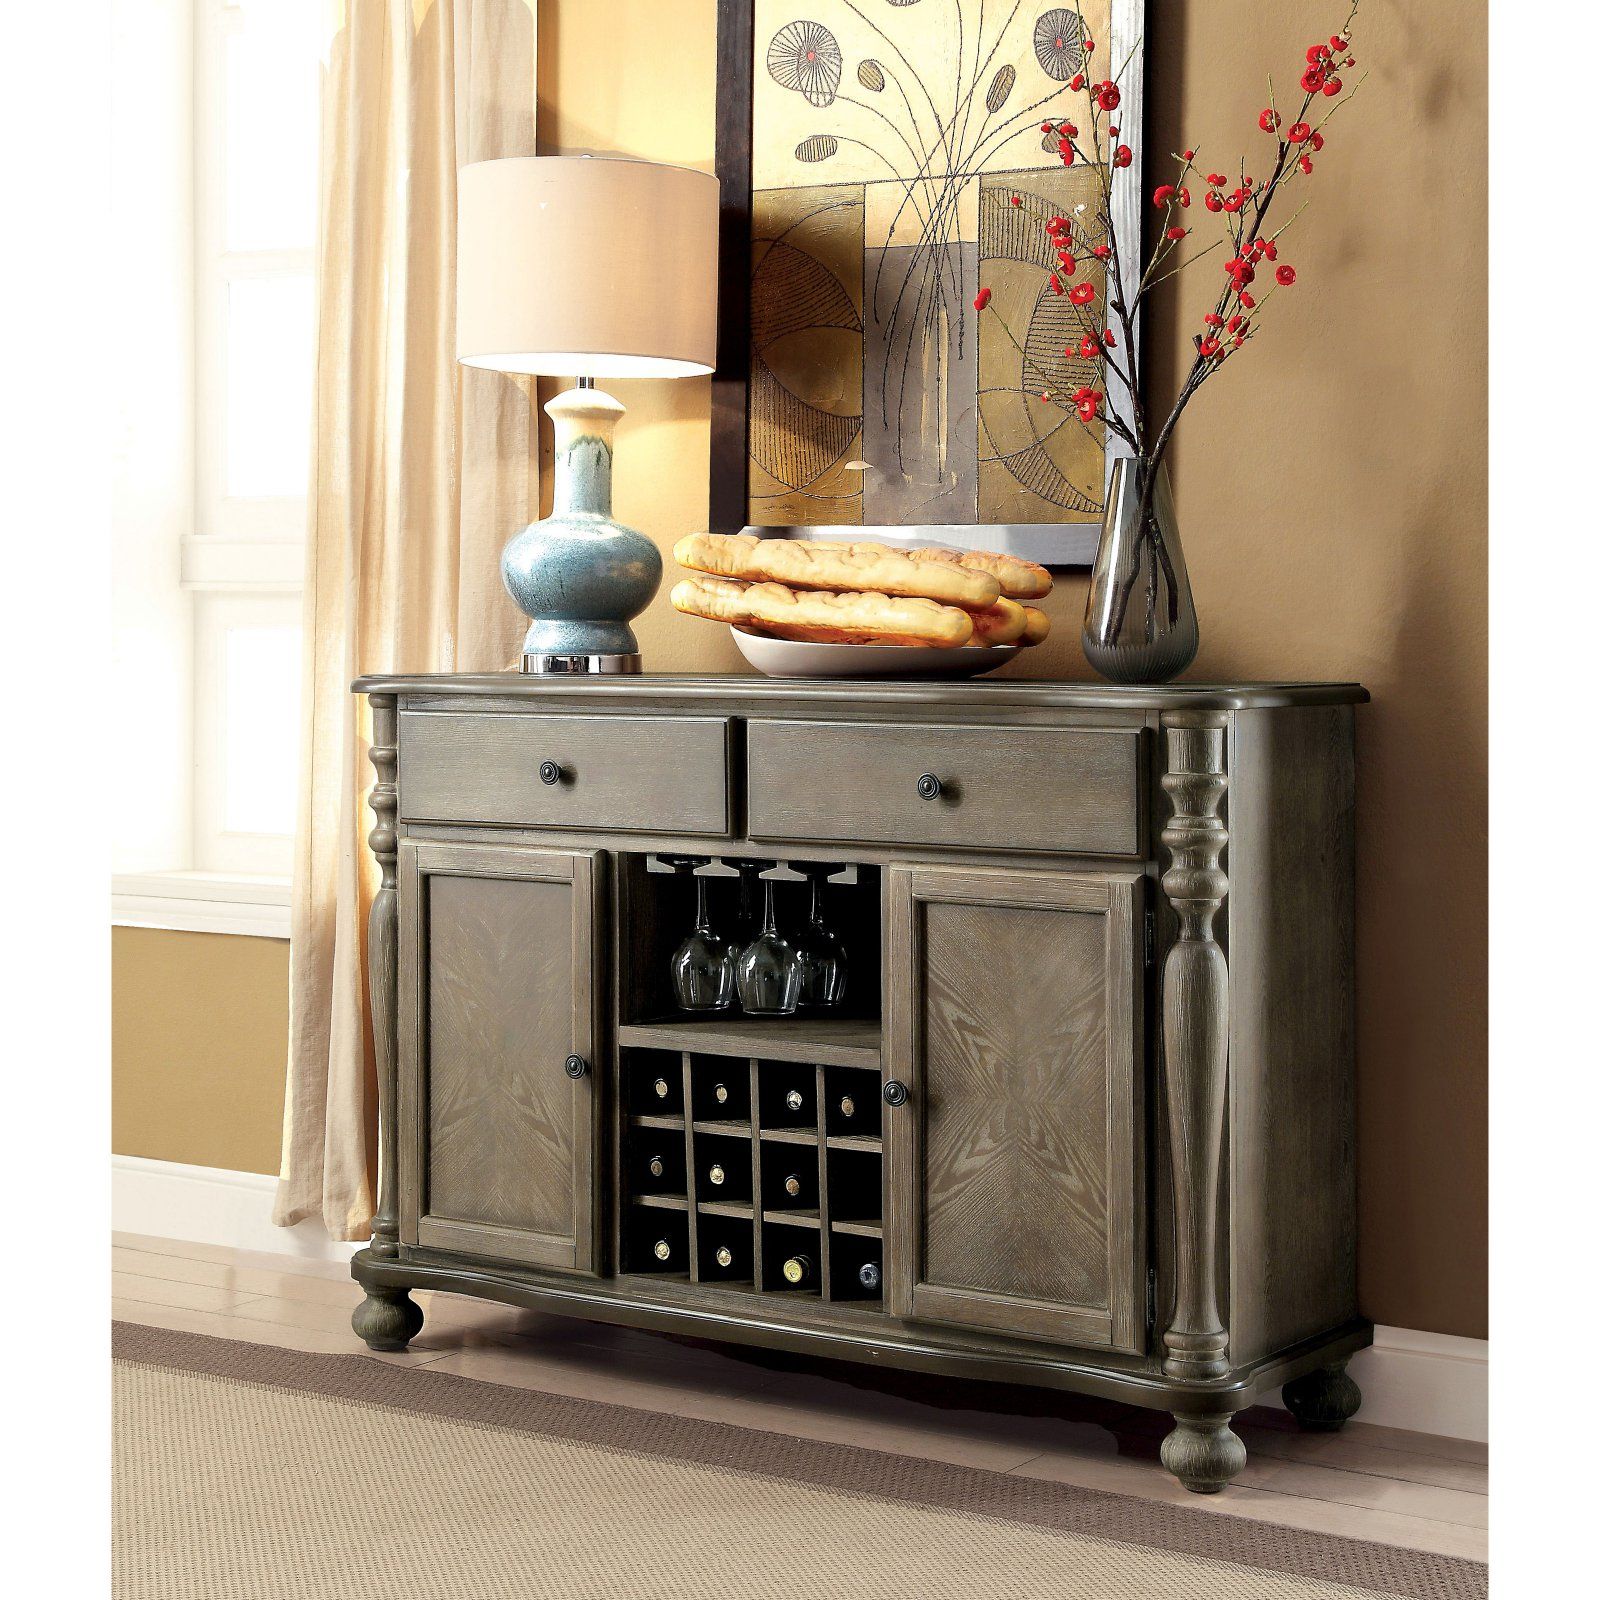 Furniture Of America Lillian Traditional Server | Products With Regard To Adelbert Credenzas (Gallery 15 of 20)